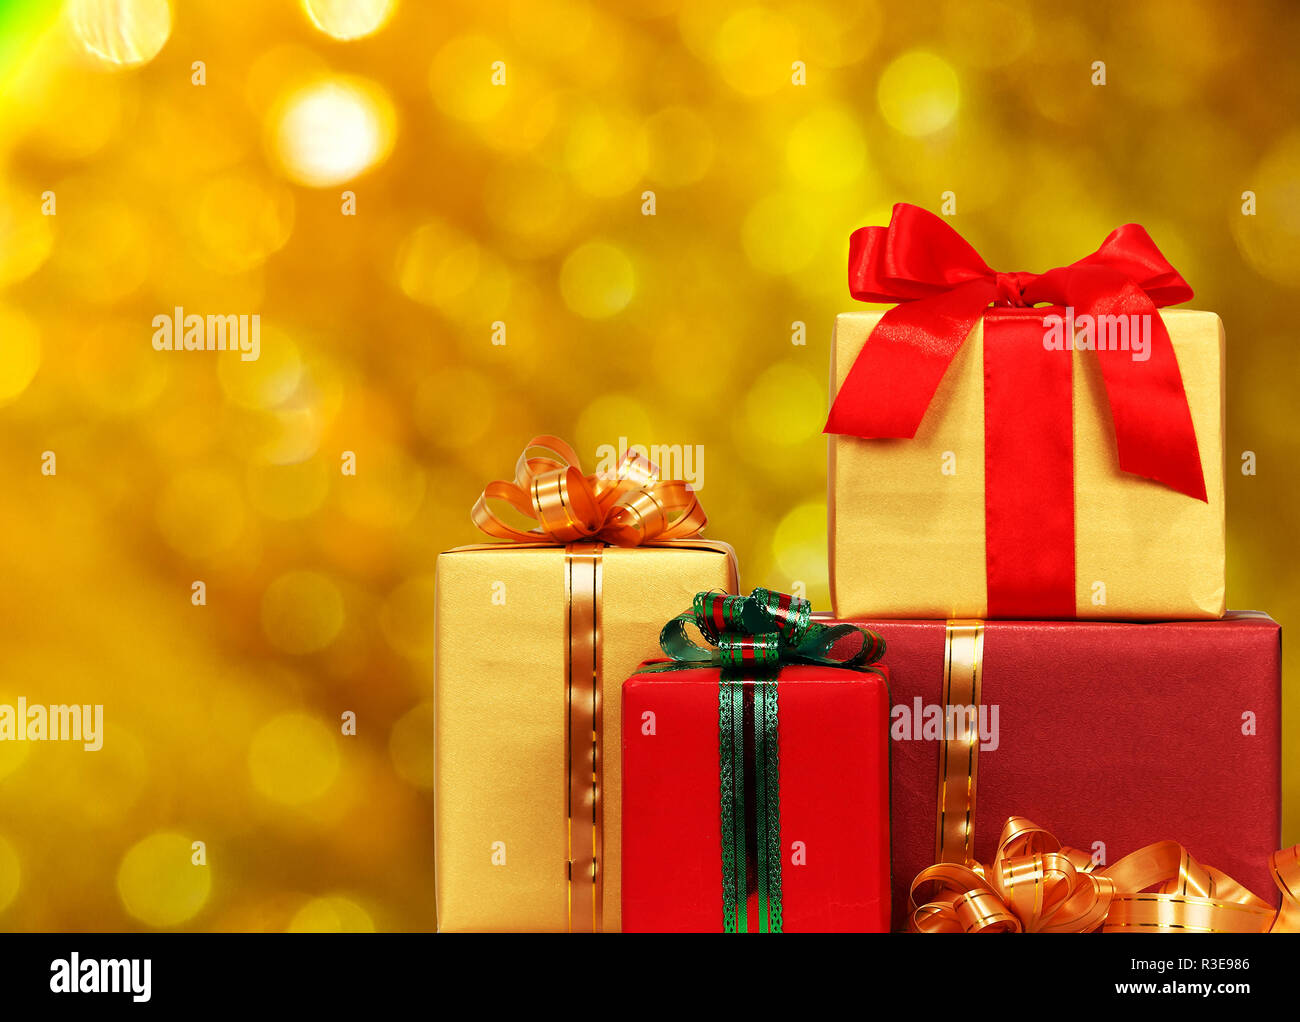 Christmas gift box with lights on background Stock Photo